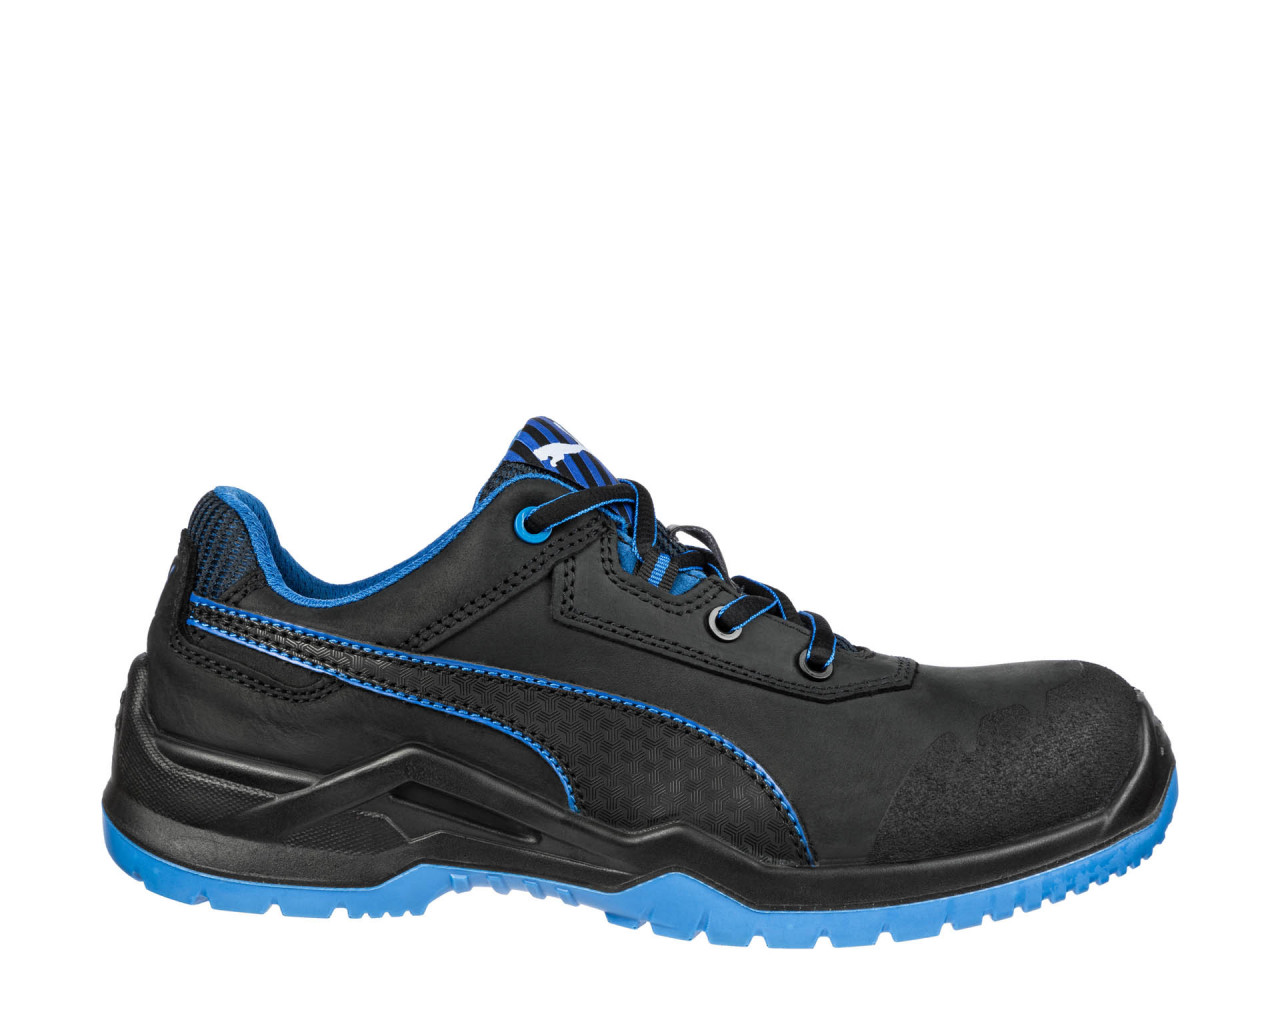 PUMA SAFETY safety shoes S3 Safety | BLUE LOW English SRC ARGON Puma ESD